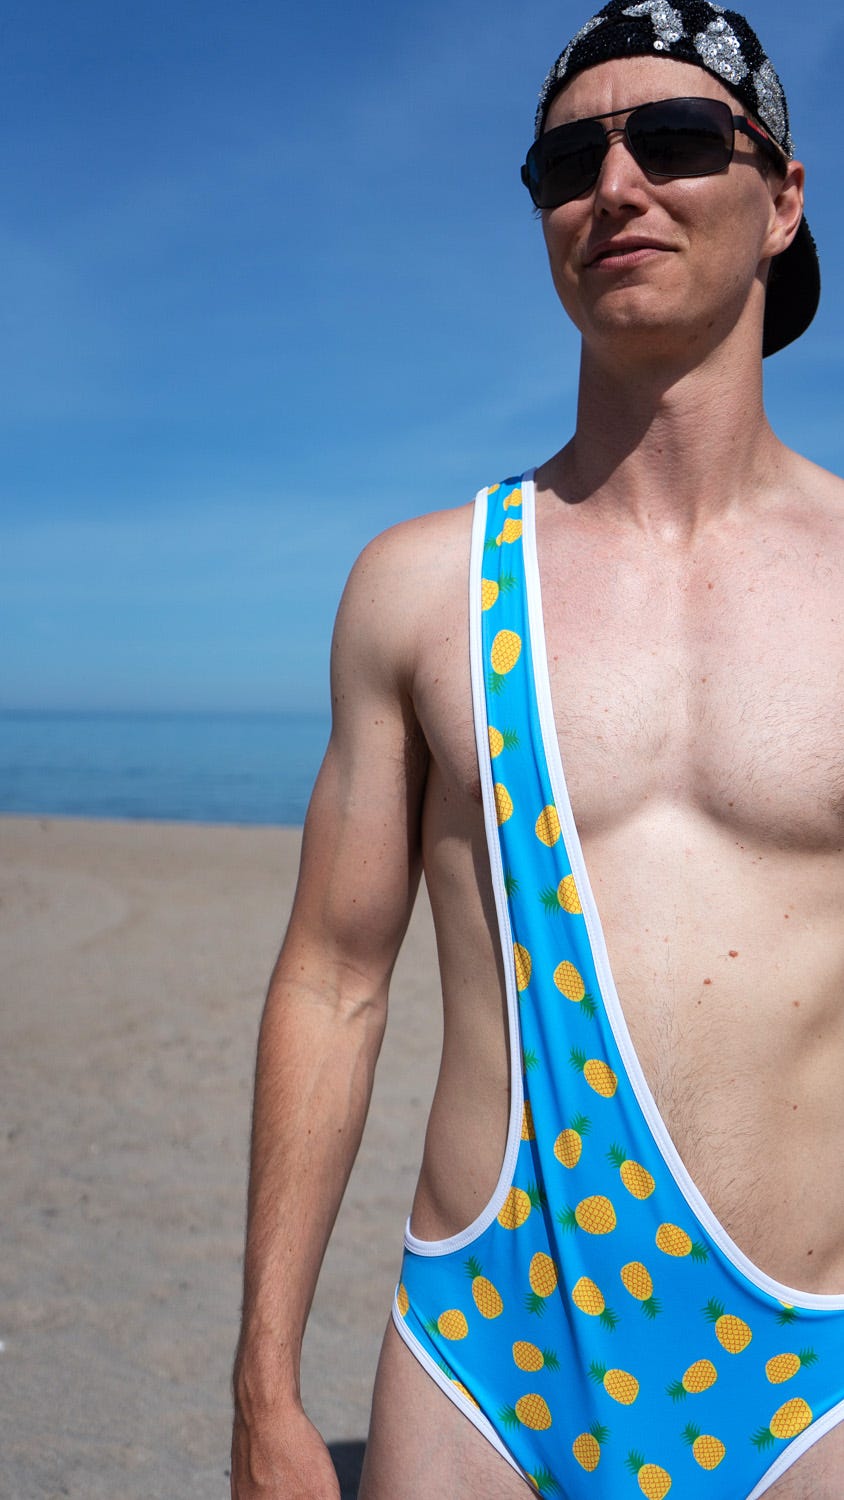 Is the Brokini the Future of Men's Bathing Accessories? | by Jack Shepherd  | Sharks and Spades | Medium